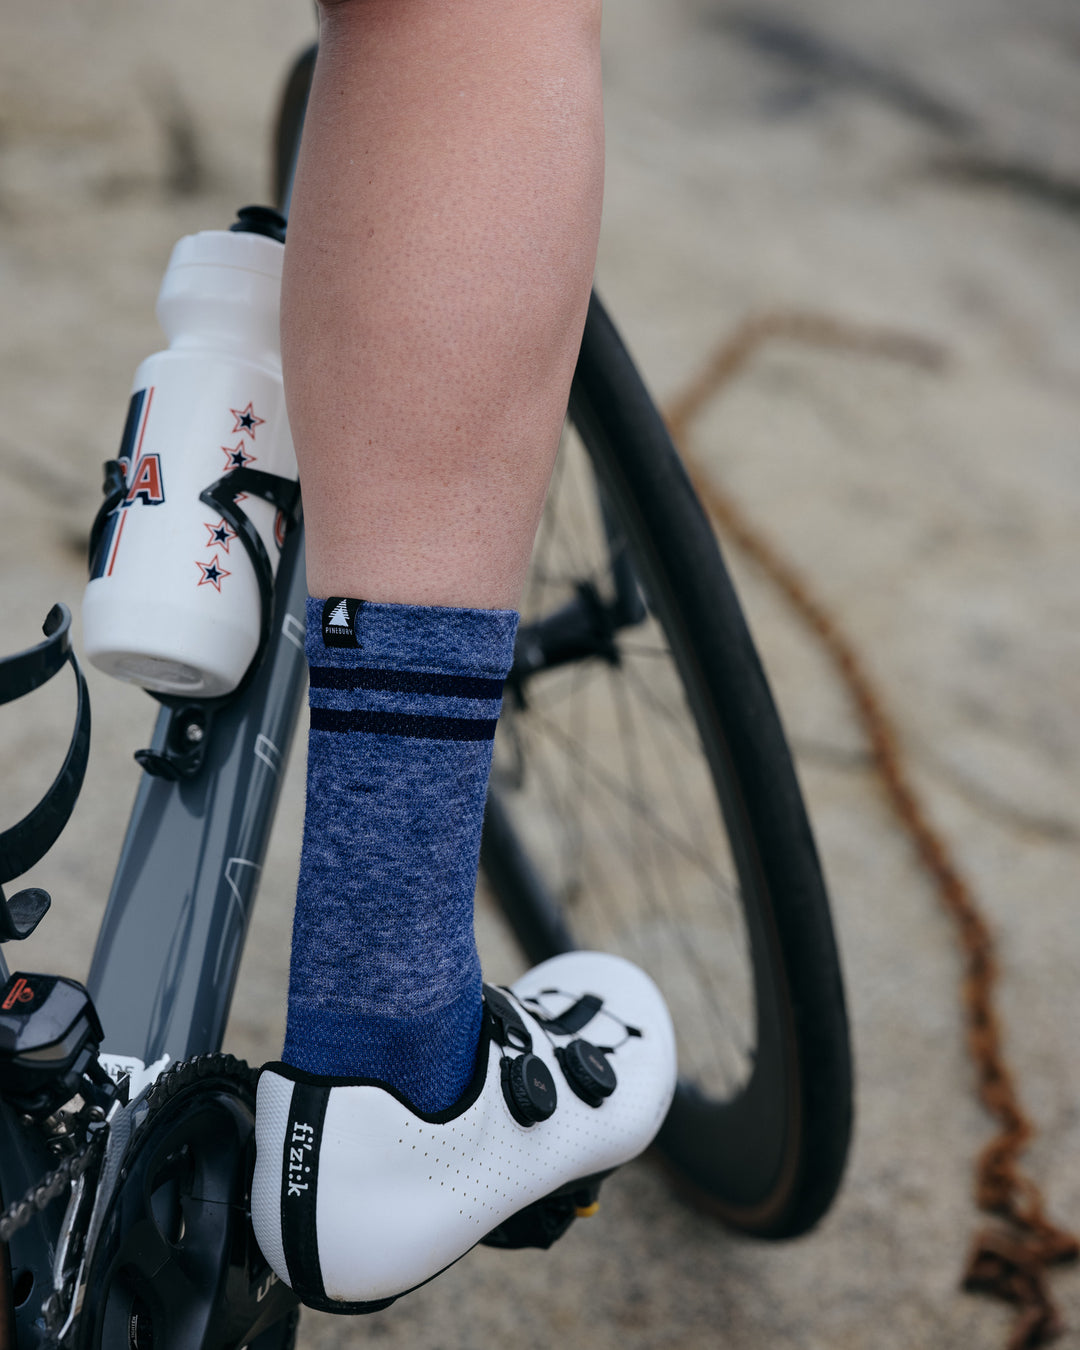 Pinebury Signature Merino Wool Sock in Blue. Close up rear shot of cyclist riding with right foot on the pedal in white shoes with blue socks.